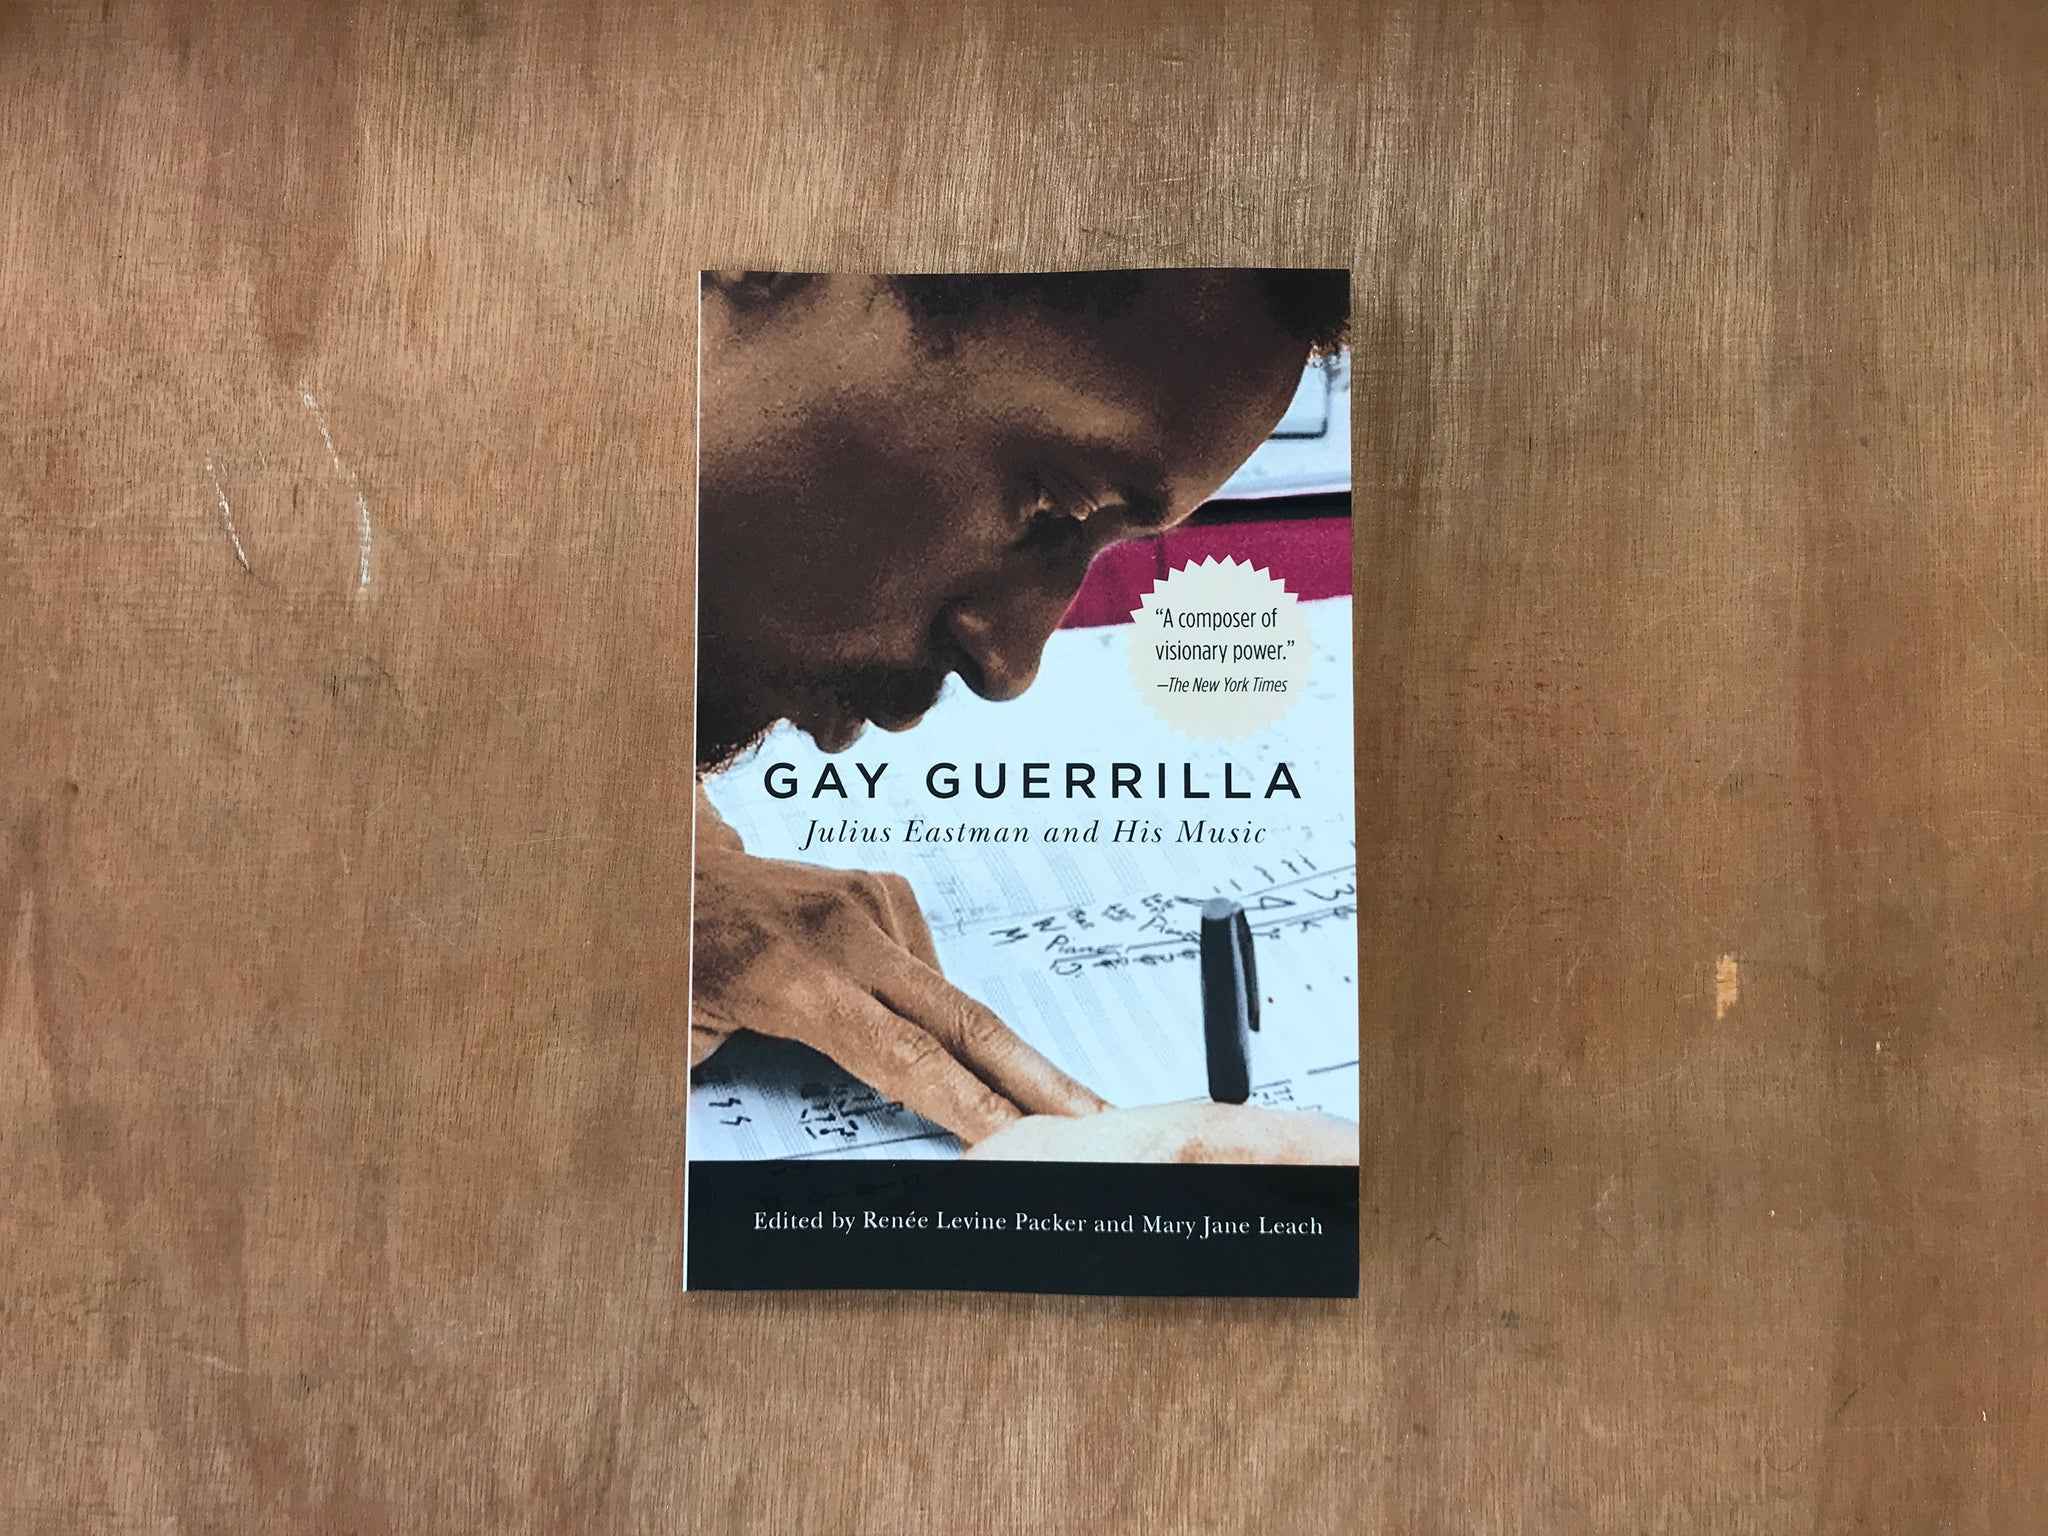 GAY GUERILLA: JULIUS EASTMAN AND HIS MUSIC by Renée Levine Packer & Mary Jane Leach